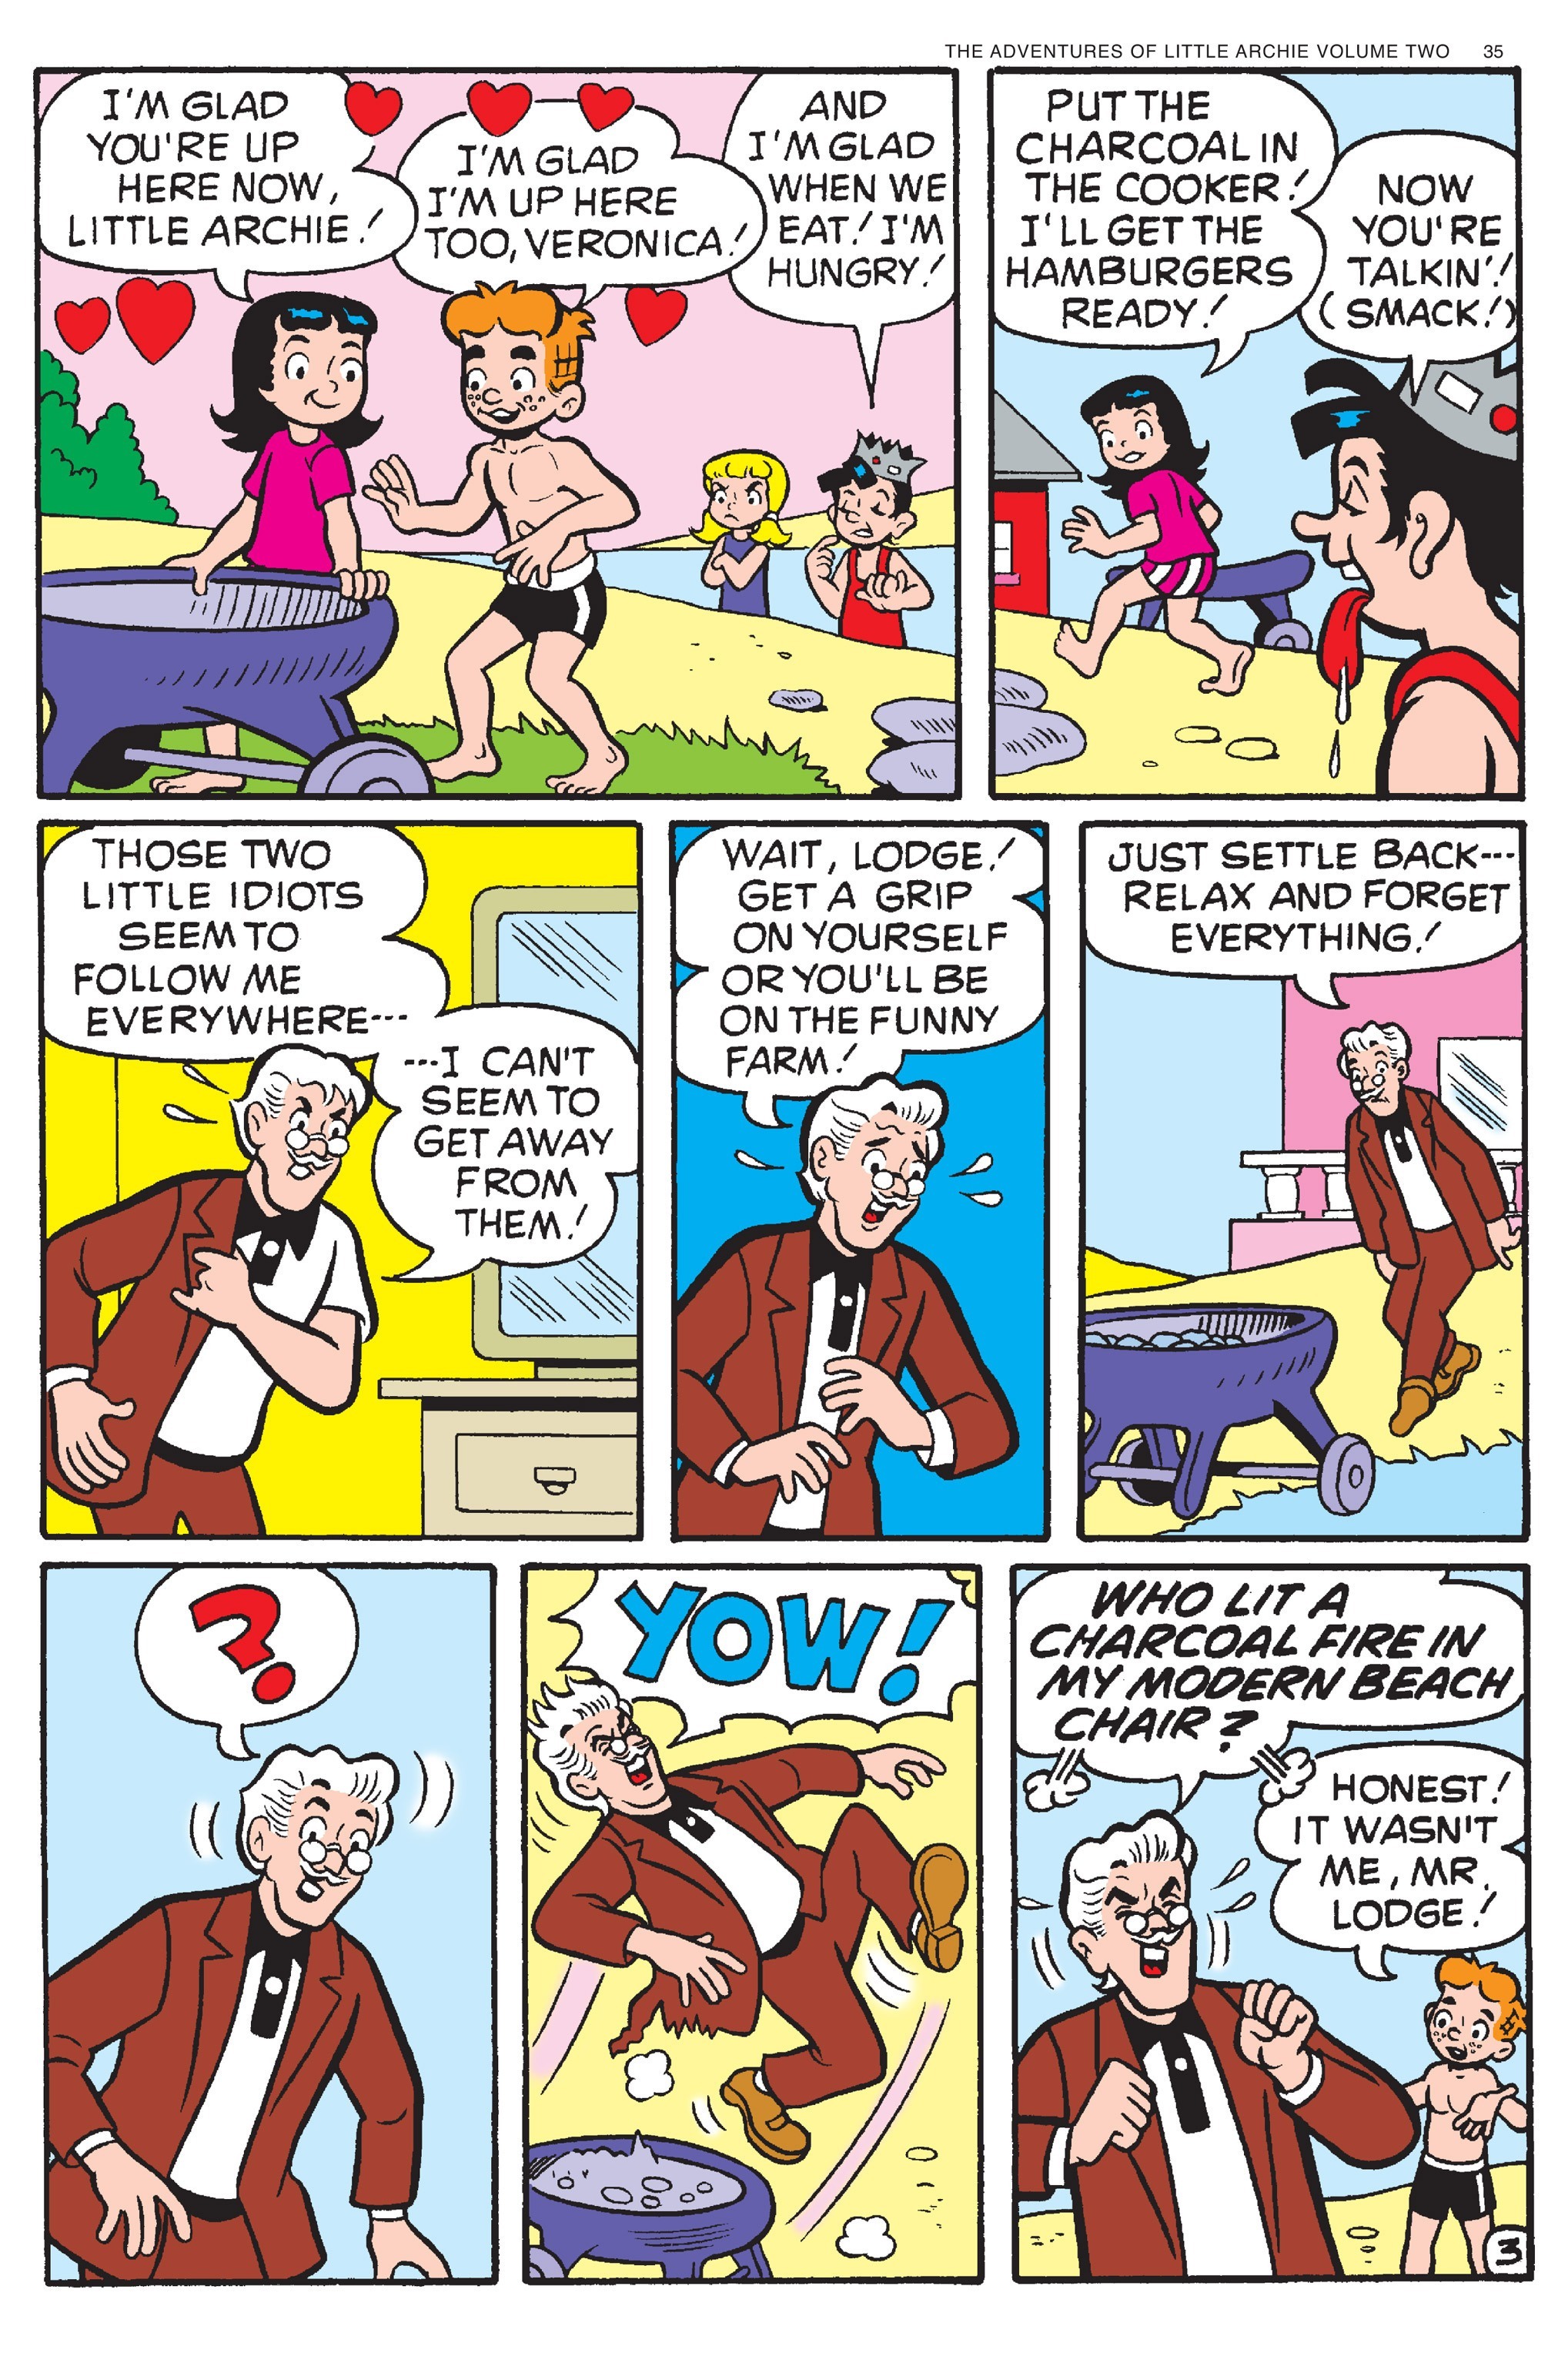 Read online Adventures of Little Archie comic -  Issue # TPB 2 - 36